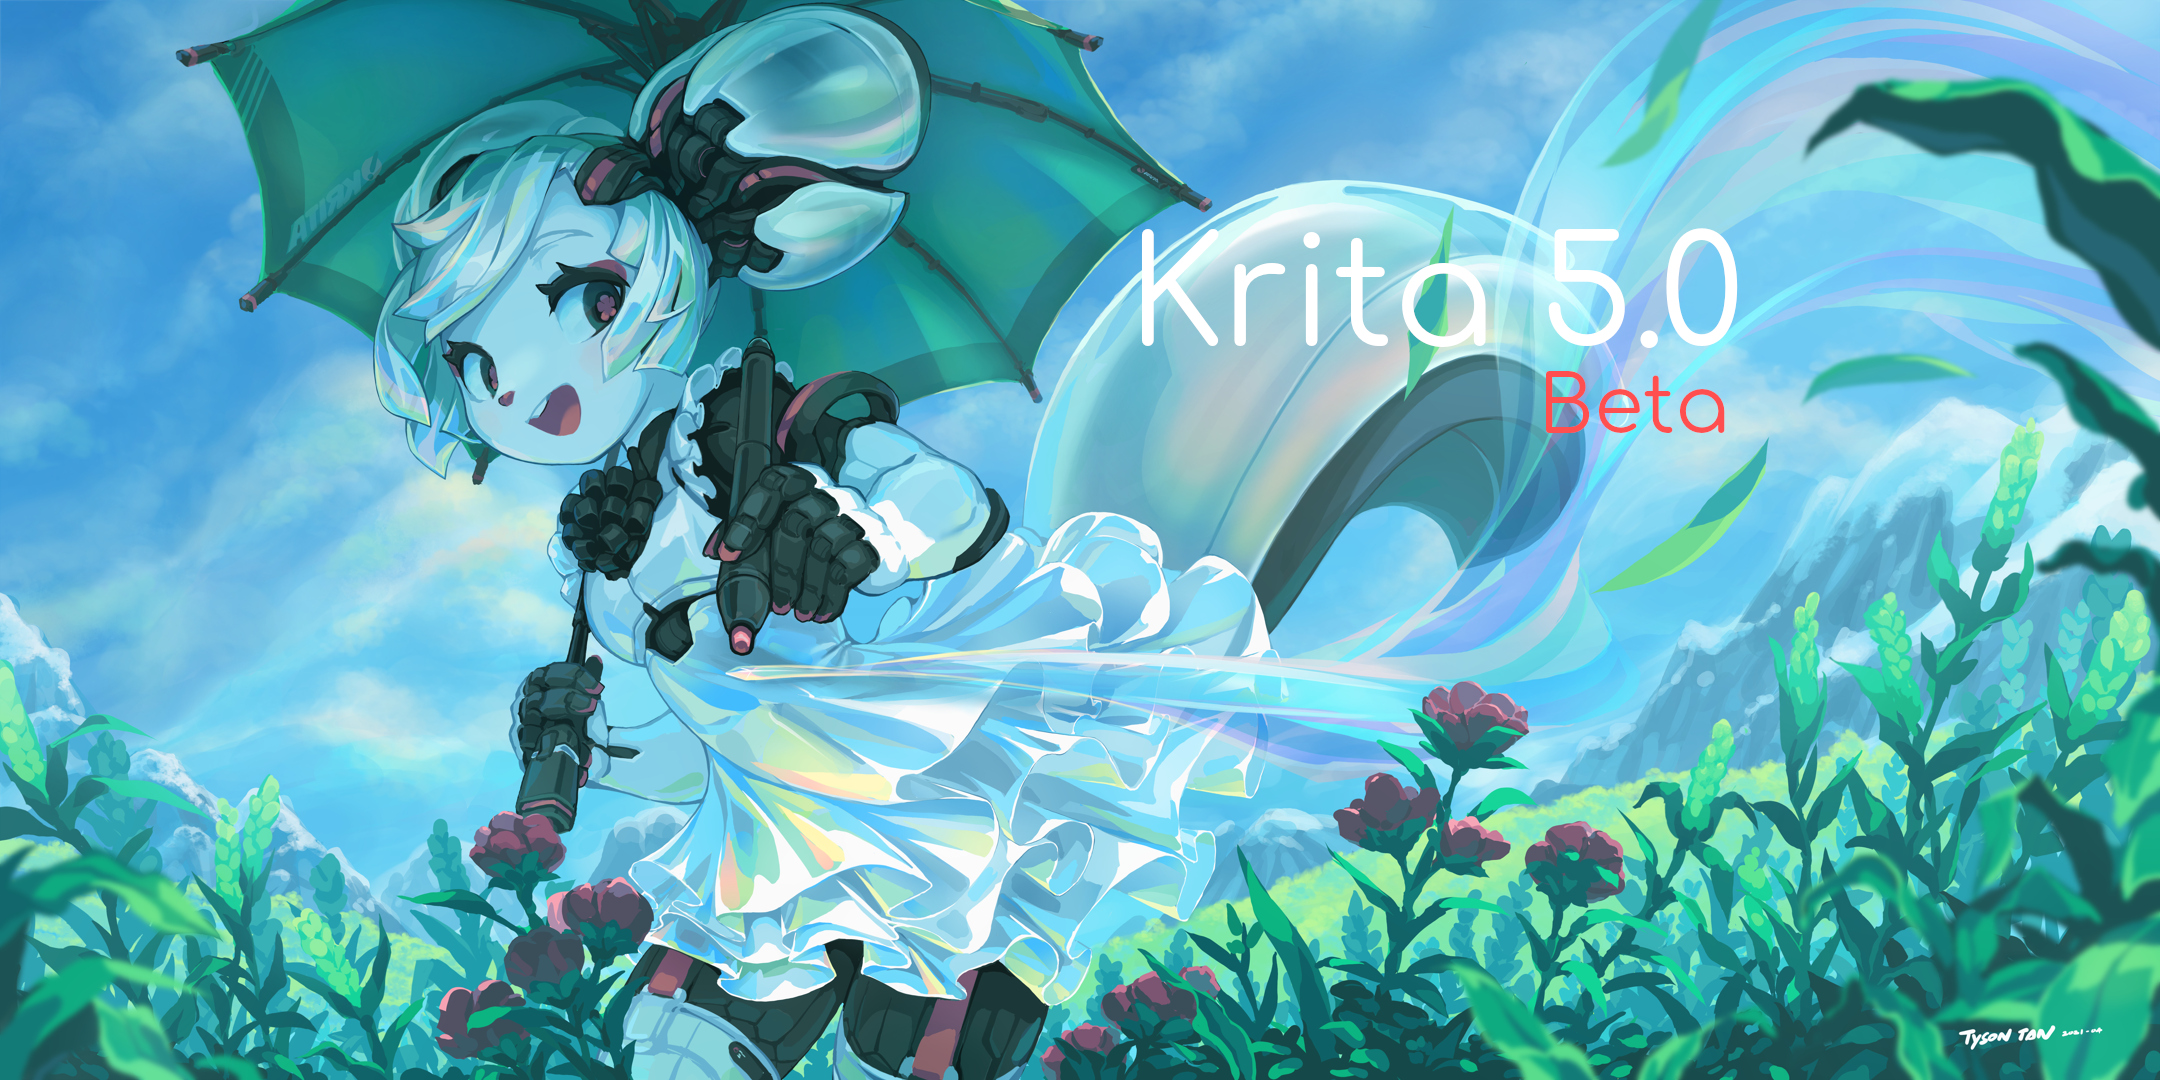 Krita 5.0 Enters Public Beta Testing with All-New Resource System, Many New Features